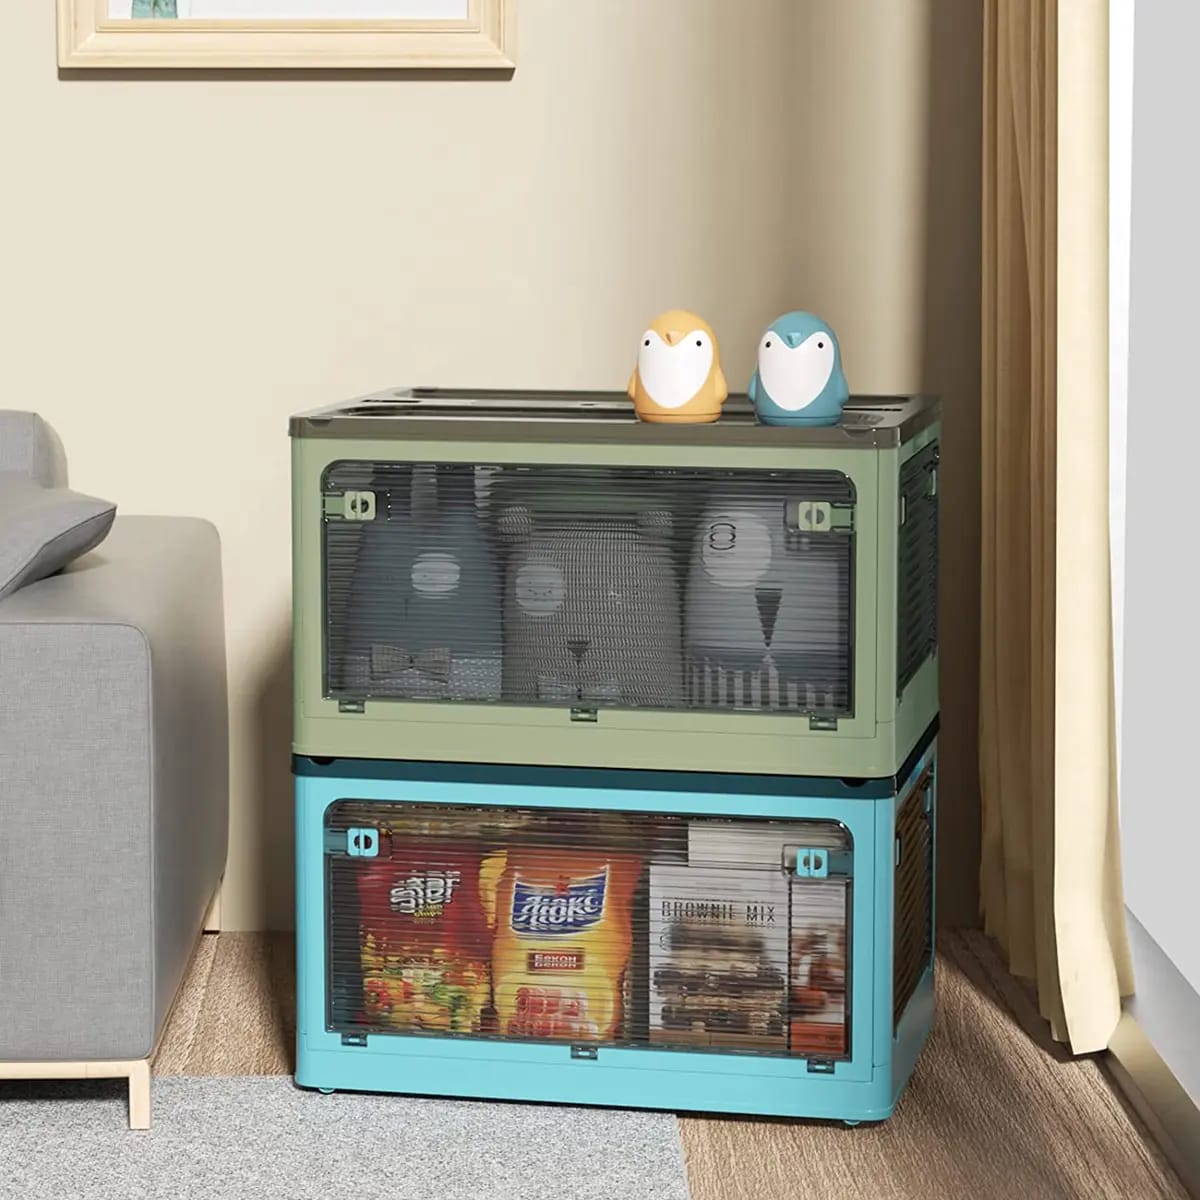 2 Foldable Transparent Storage Box with Wheels 1 in green and 1 in blue kept in a room next to a sofa